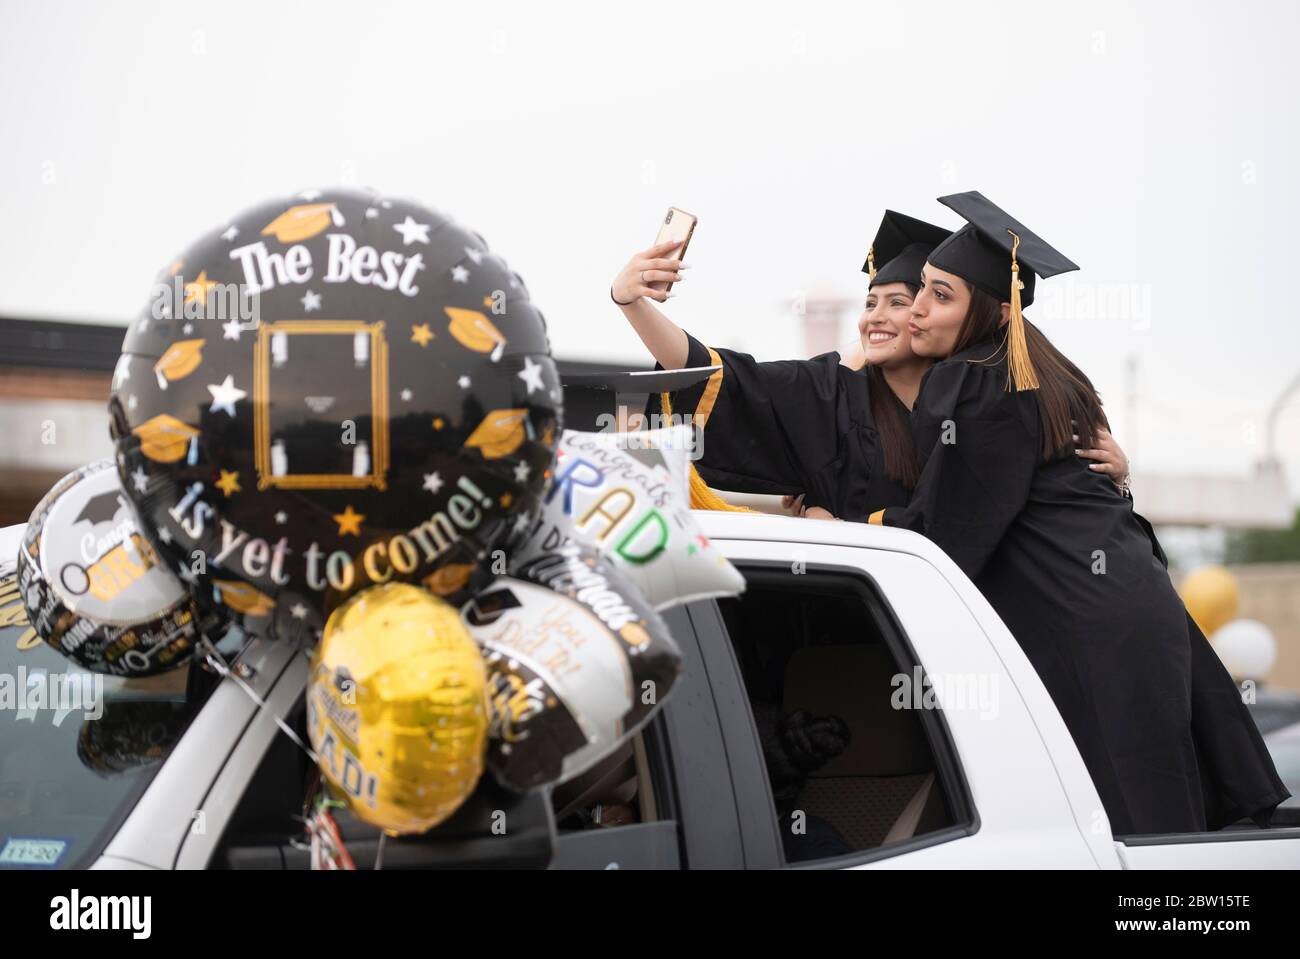 Graduates of Navarro Early College High School, including Esmerelda Alvarez (l) and Alma Pina, parade through their north Austin neighborhood on May 28, 2020 as they celebrate an academic finale shortened by the coronavirus pandemic. About 200 graduates piled into cars, waving at family and friends in the two-mile parade. Credit: Bob Daemmrich/Alamy Live News Stock Photo